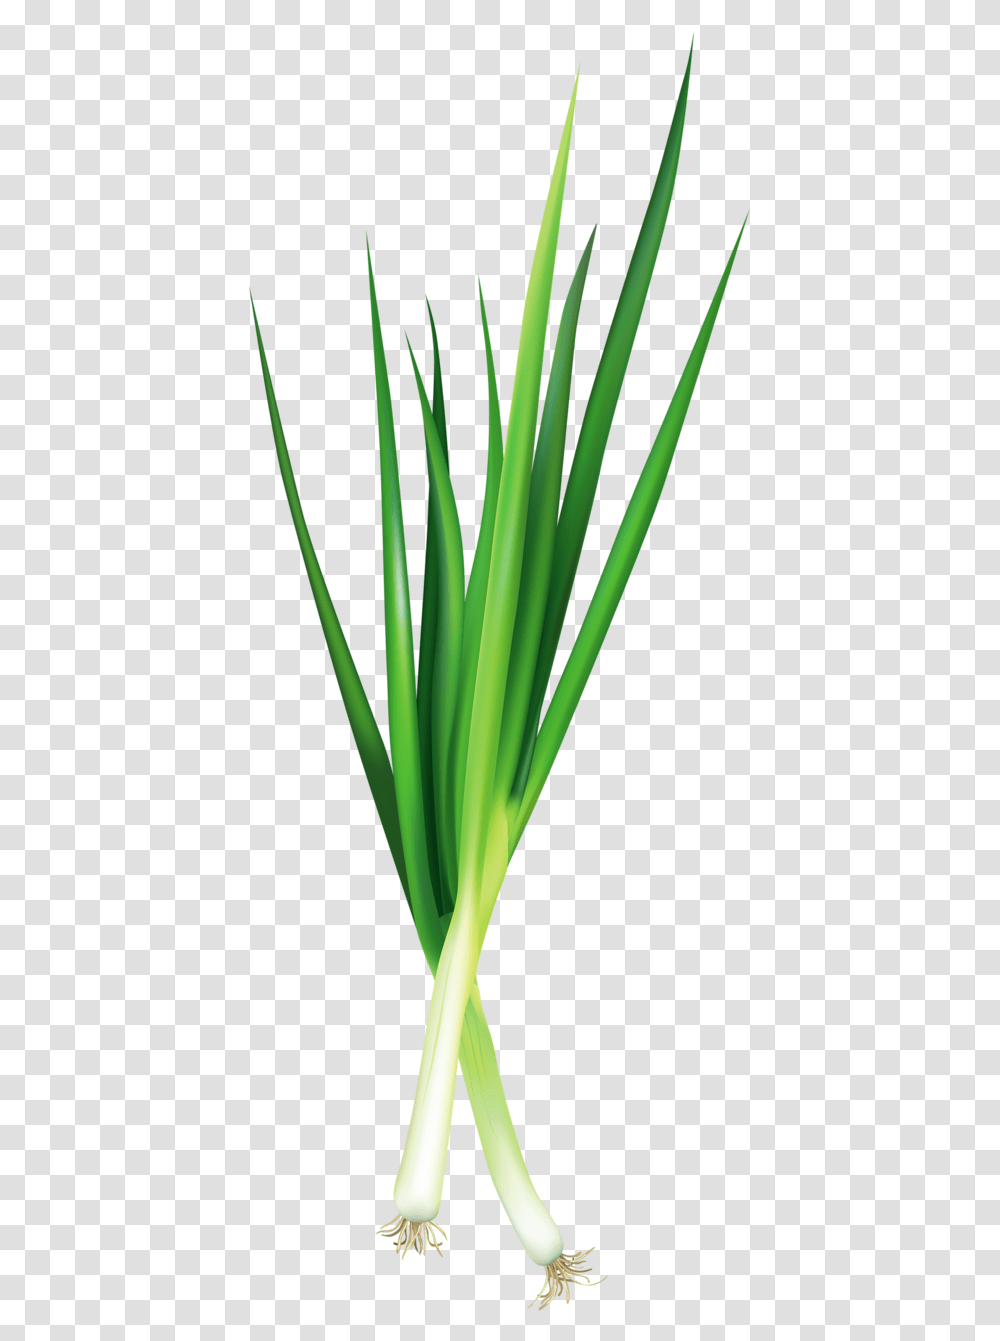 Fotki Vegetable Pictures Food Stickers Green Onions Green Onion, Plant, Produce, Leek, Flower Transparent Png